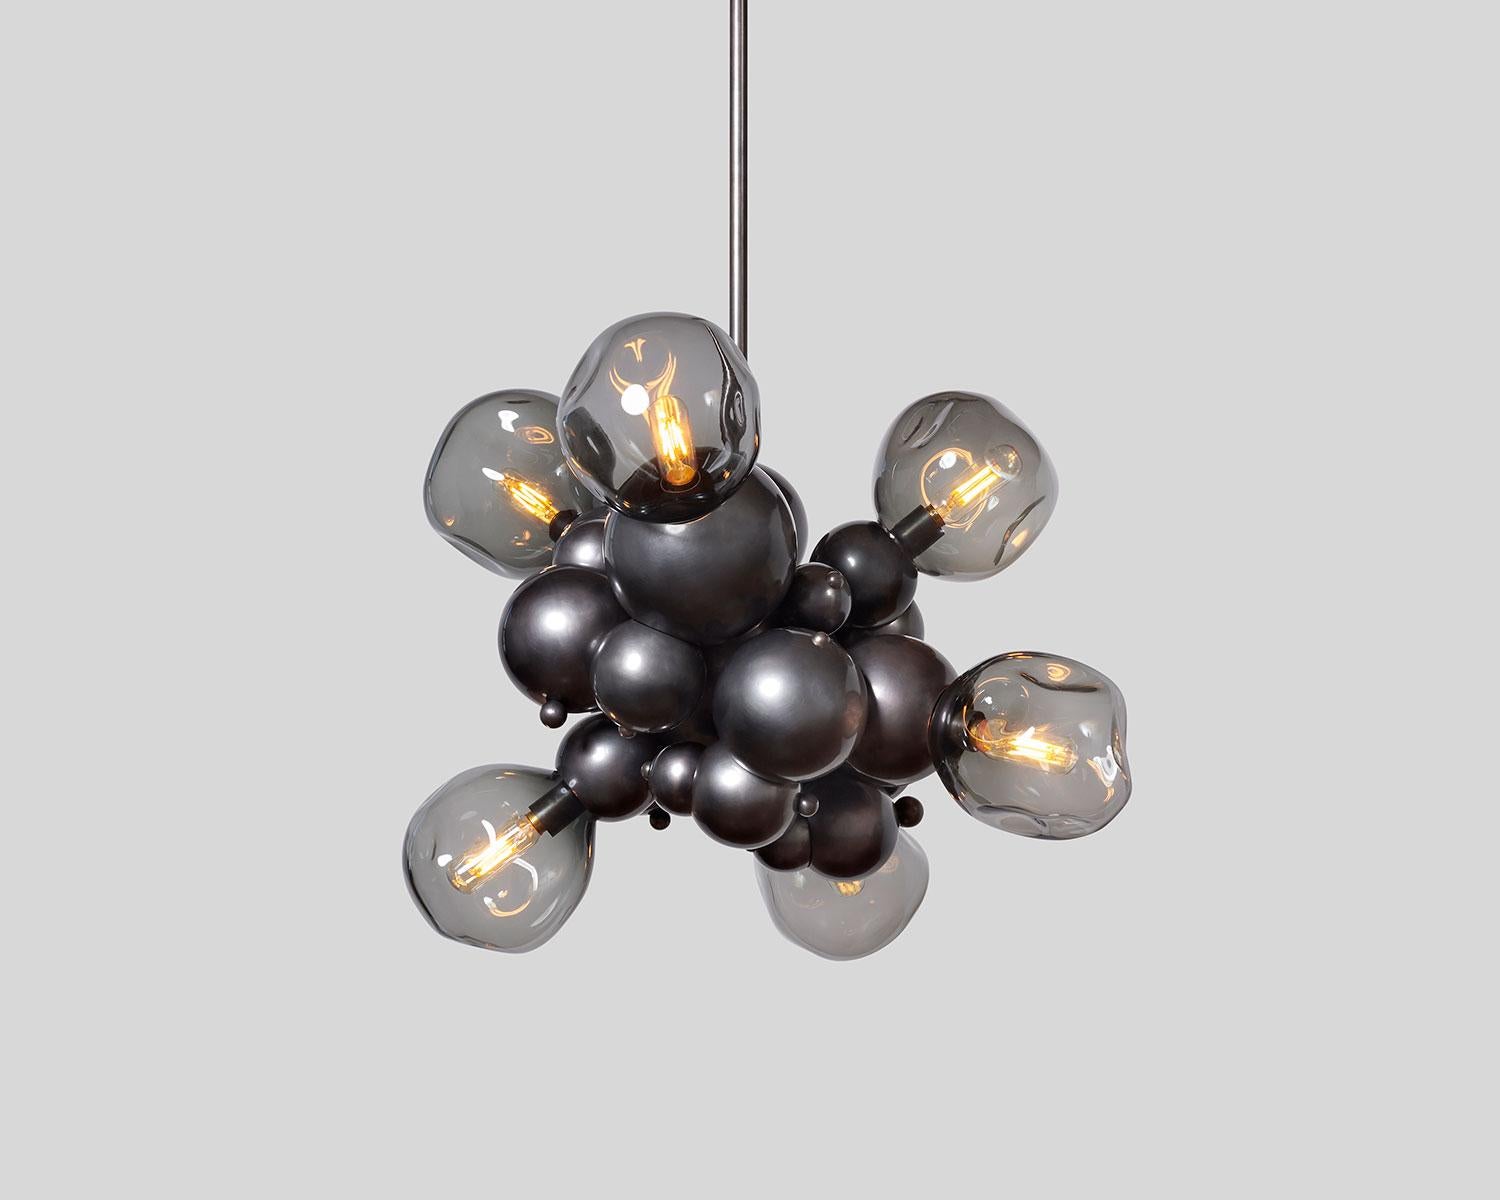 Organic mid-size cluster chandelier or large pendant with six hand blown glass lights, designed from interlocking spun brass spheres. Inspired by soap bubbles and botryoidal hematite, Rosie Li's 